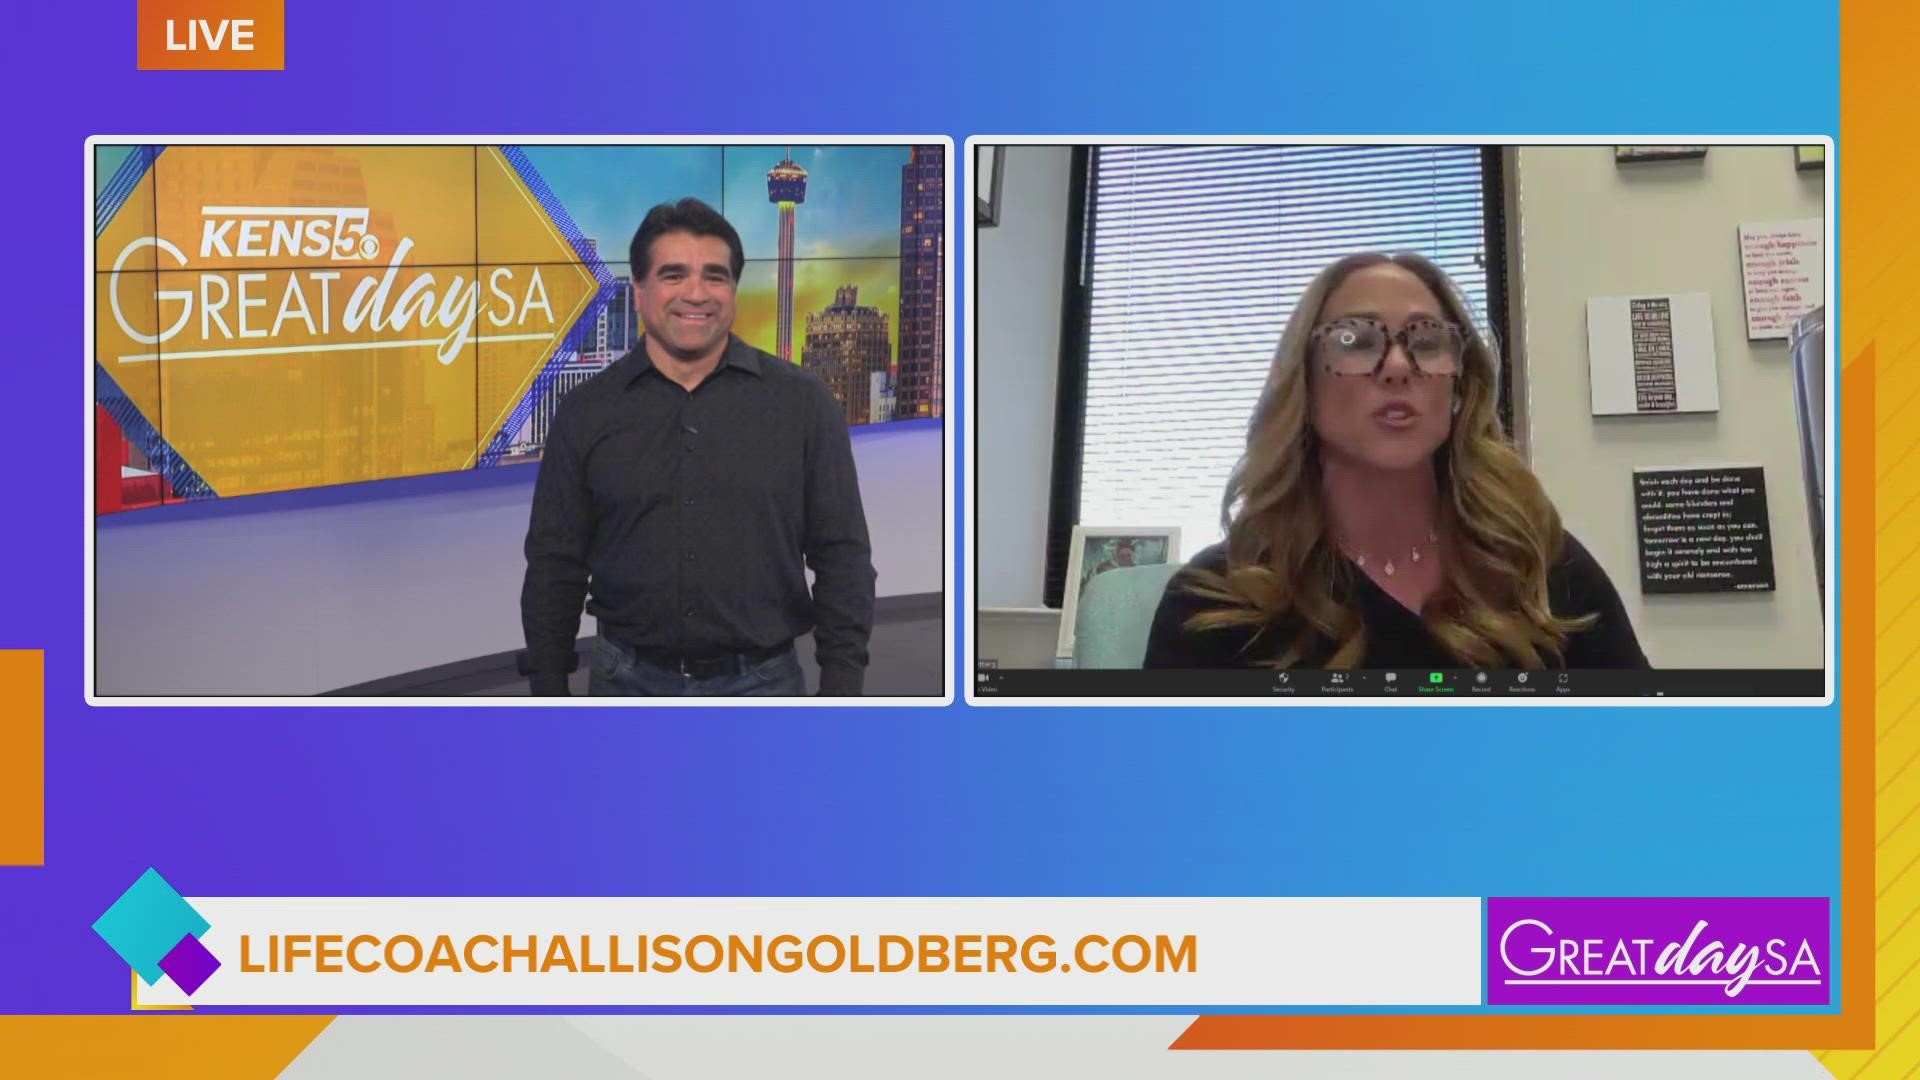 Life Coach Allison Goldberg is here to talk about a new "you" for the new year!